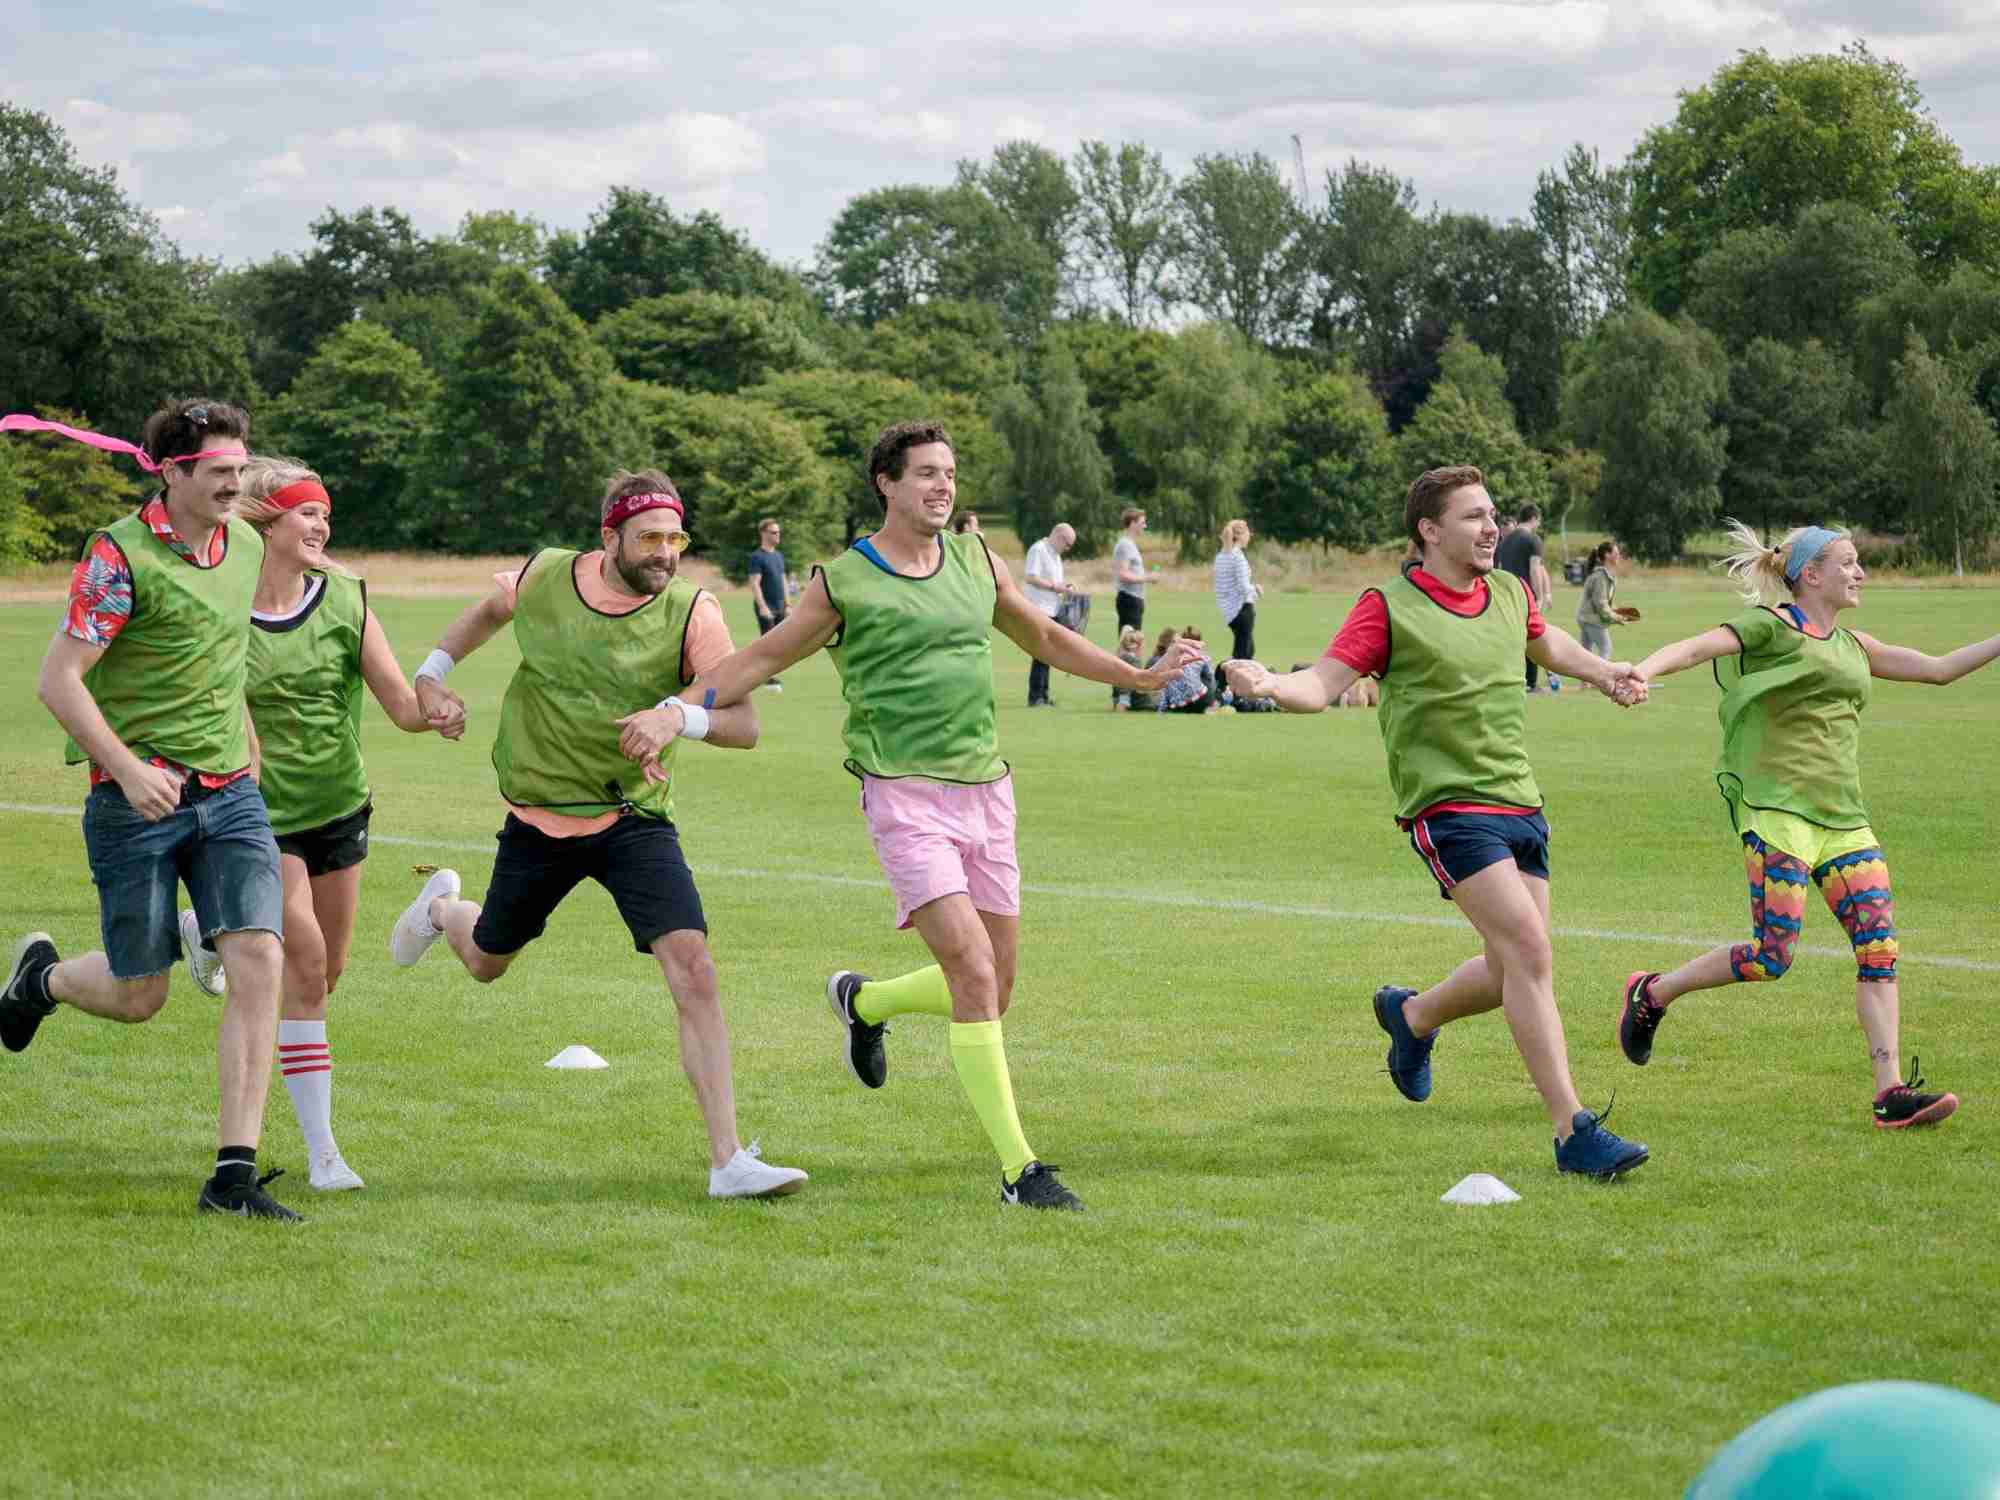 Unusual Team Building Activities in London - Old School Sports Day